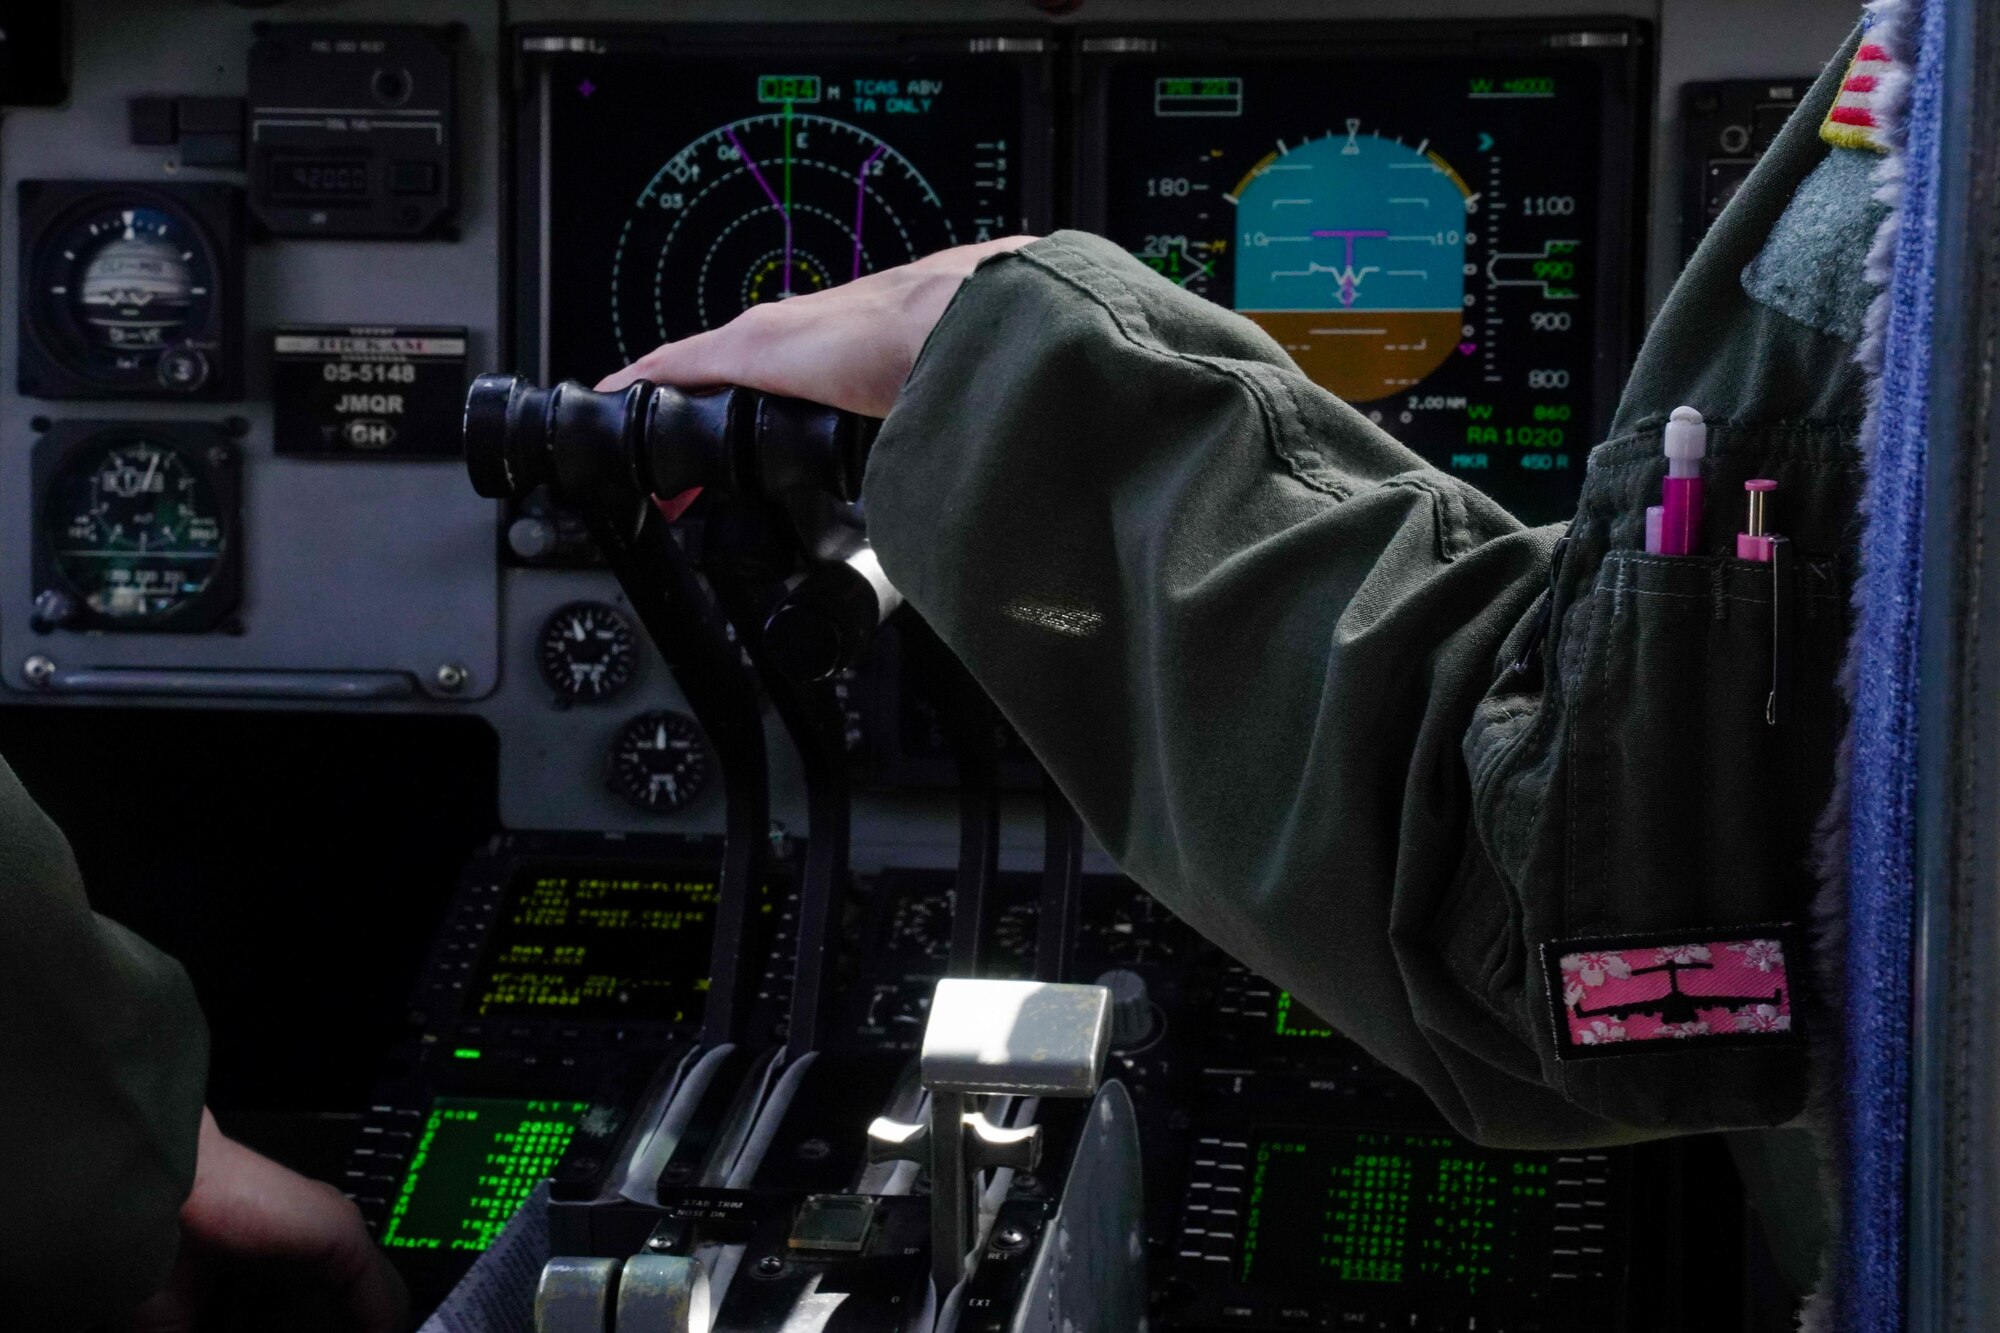 Maj. Jacqueline Cushing, 535th Airlift Squadron instructor pilot, adjusts controls on a C-17 Globemaster during a training mission around the Hawaiian Islands March 25, 2021. Women from the 535th Airlift Squadron conducted an all-female flight in honor of Women’s History Month celebrating the contributions of female airmen. Women first entered pilot training in 1976 and currently make up 21 percent of the Air Force. (U.S. Air Force photo by Airman 1st Class Makensie Cooper)